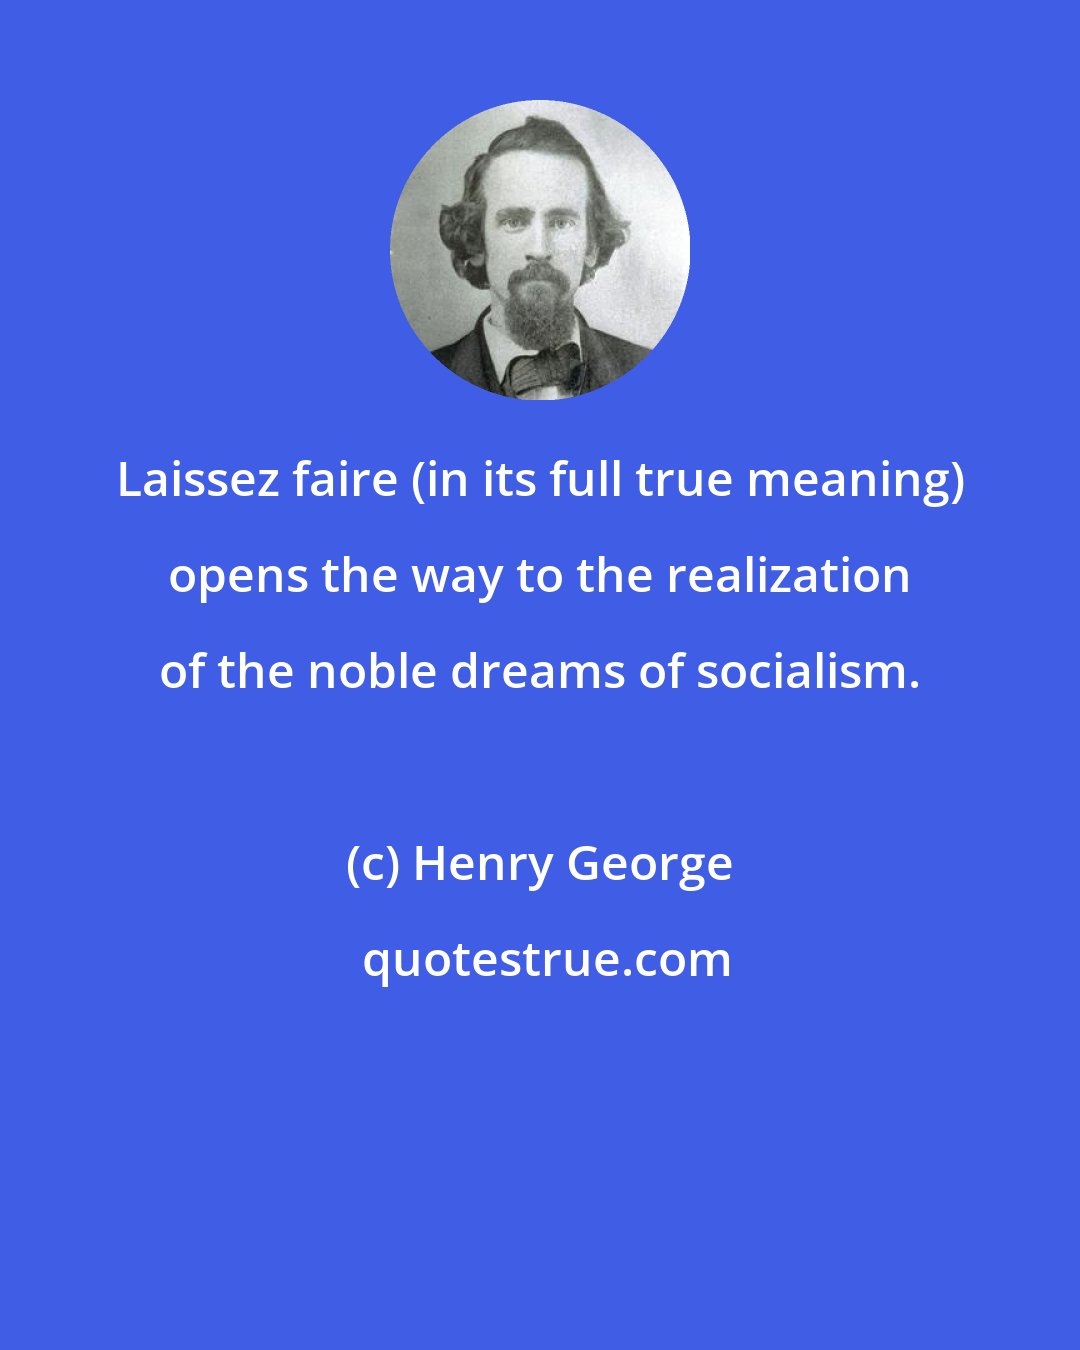 Henry George: Laissez faire (in its full true meaning) opens the way to the realization of the noble dreams of socialism.